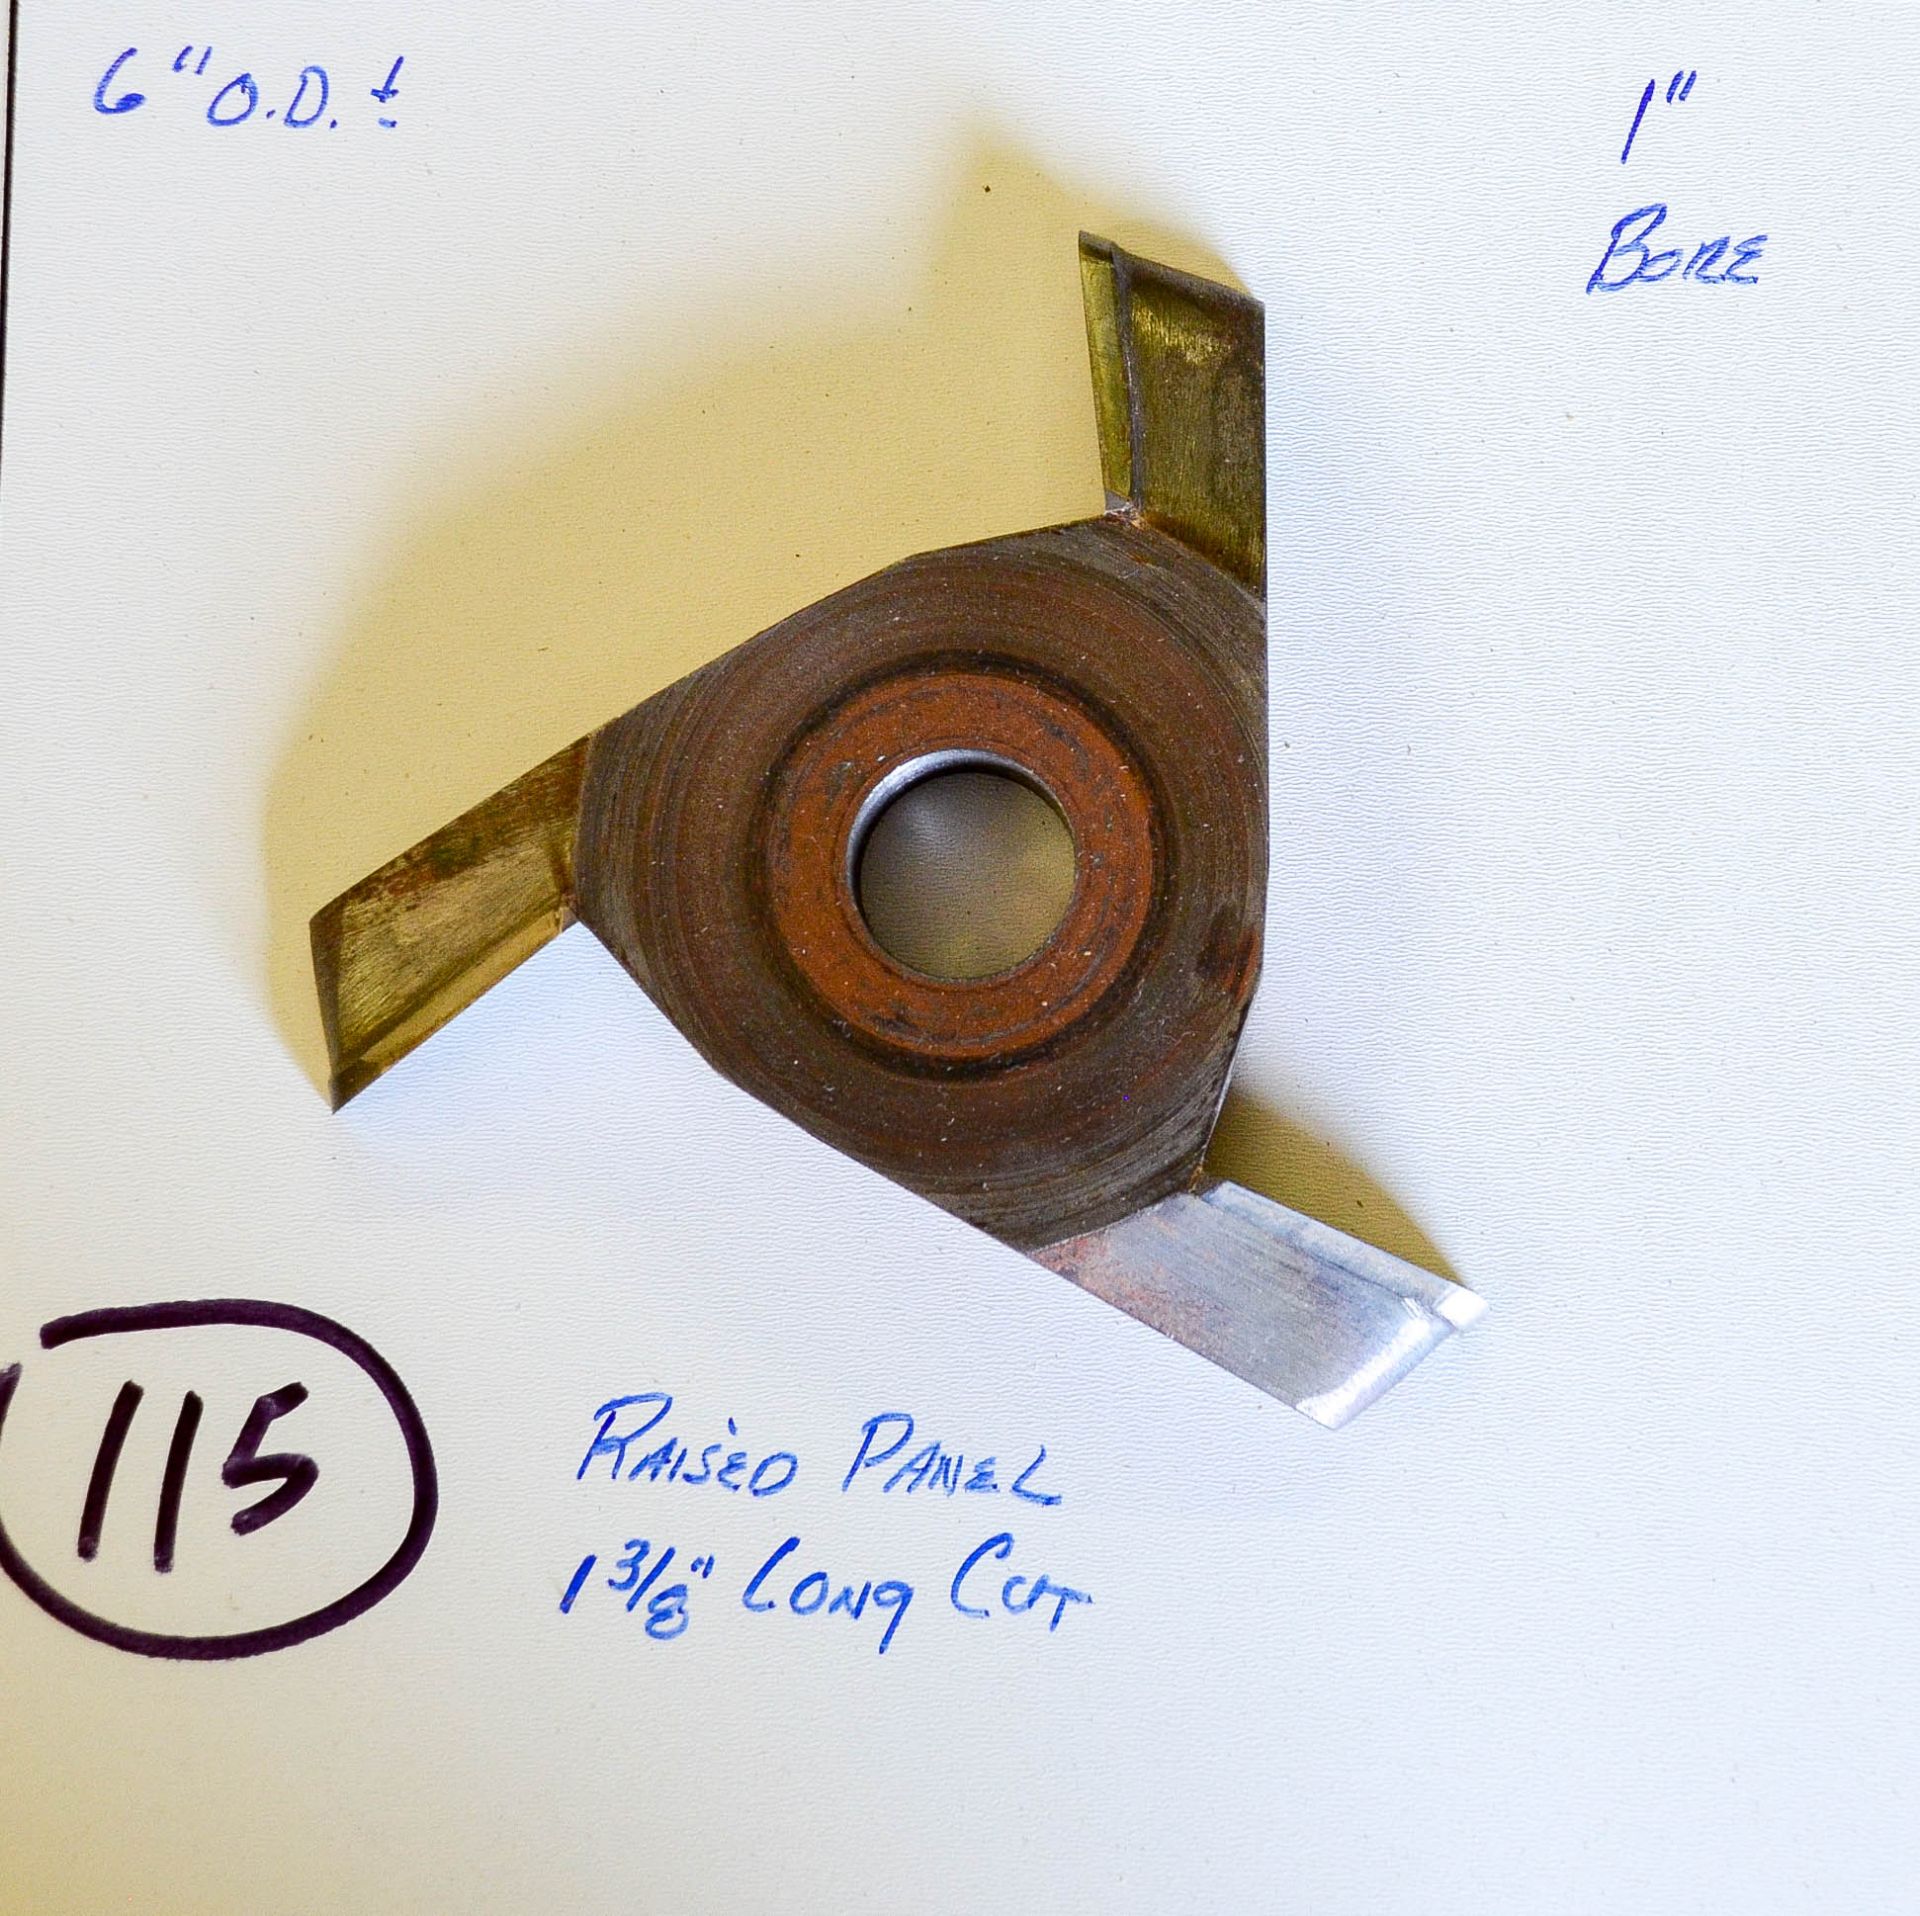 Shaper Cutter, Raised Panel Cutter, 1-3/8" Long Cut, 6" Outside Diameter, 1" Bore, See Pics for